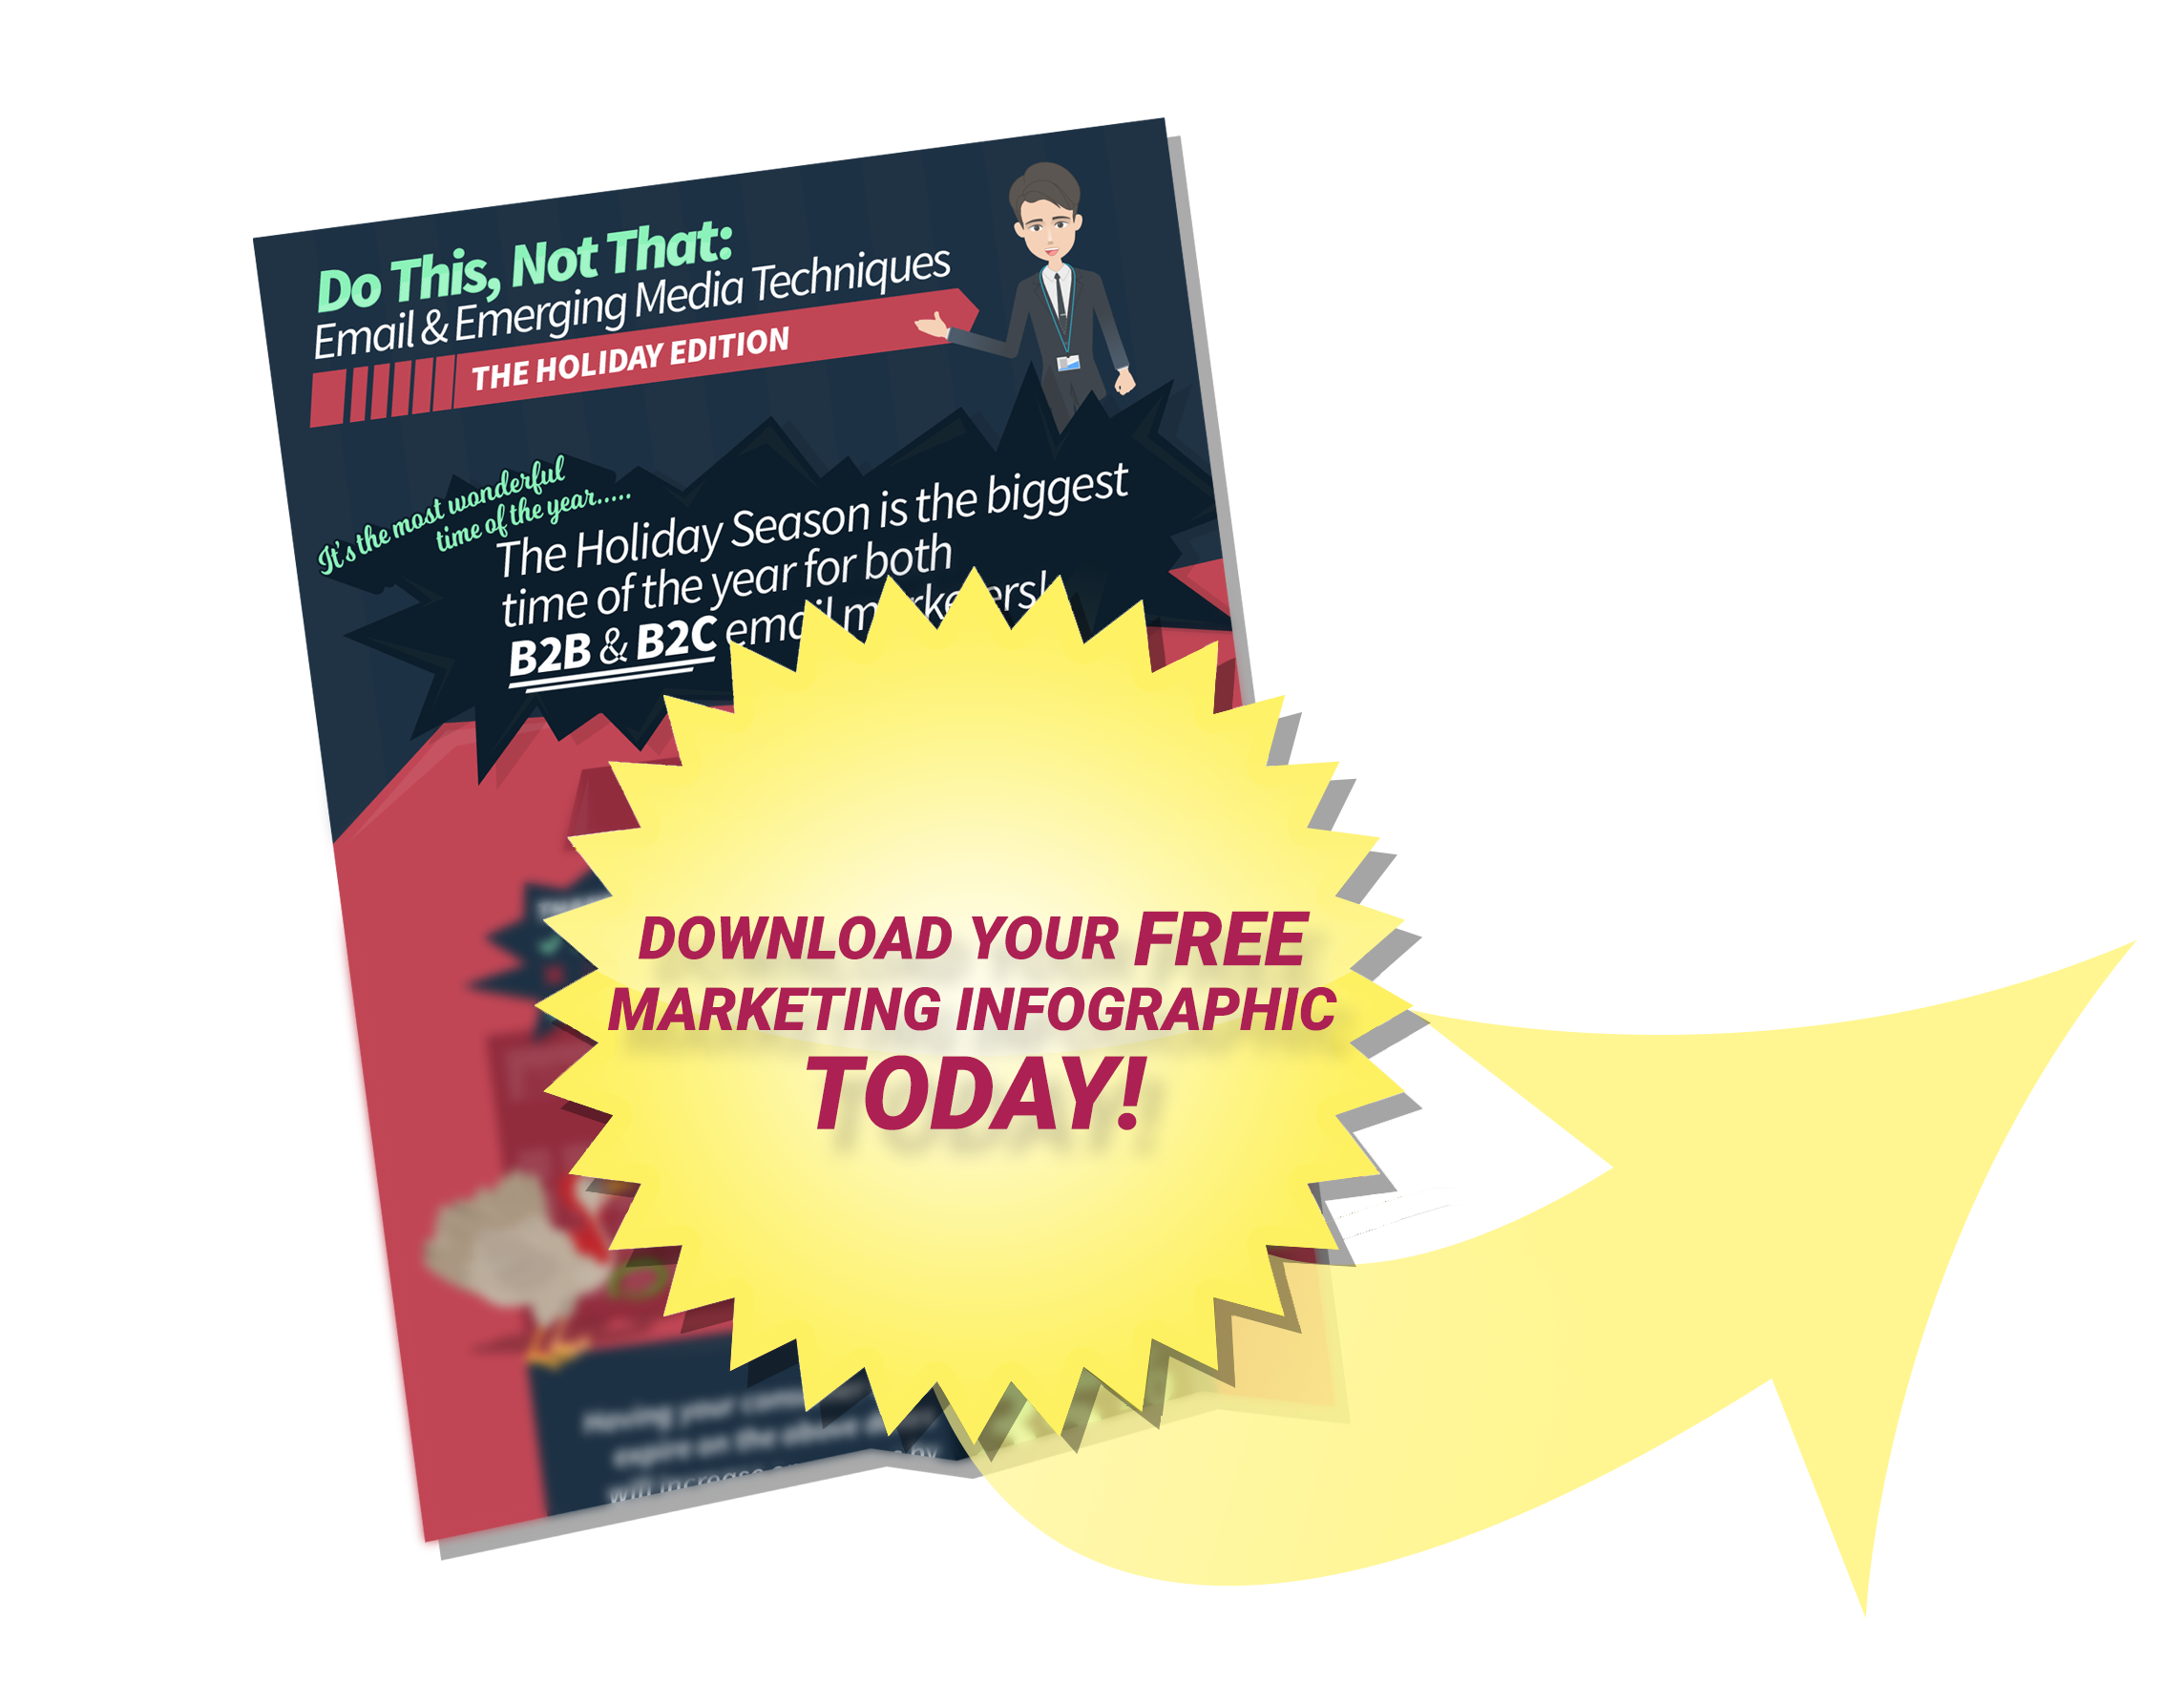 Download Your FREE Marketing Infographic Today